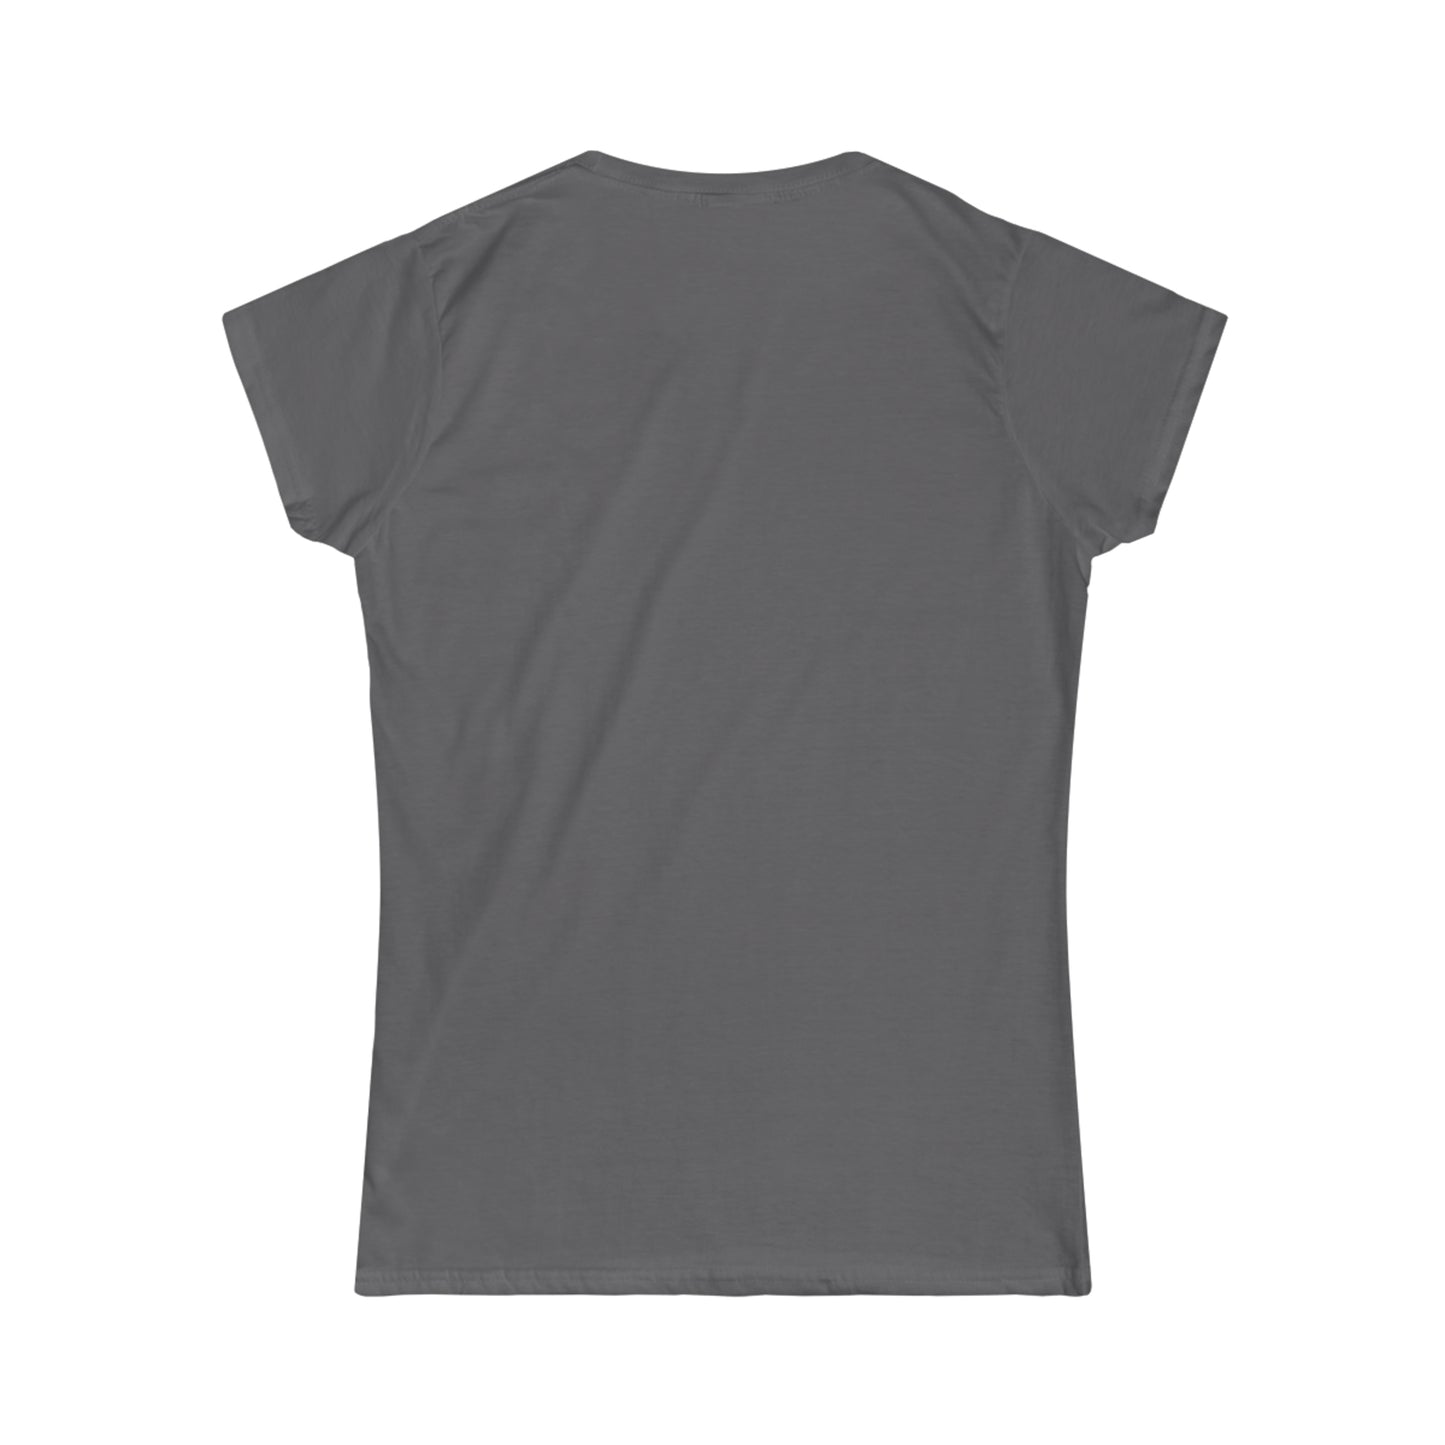 Ungovernable Women's Softstyle Tee